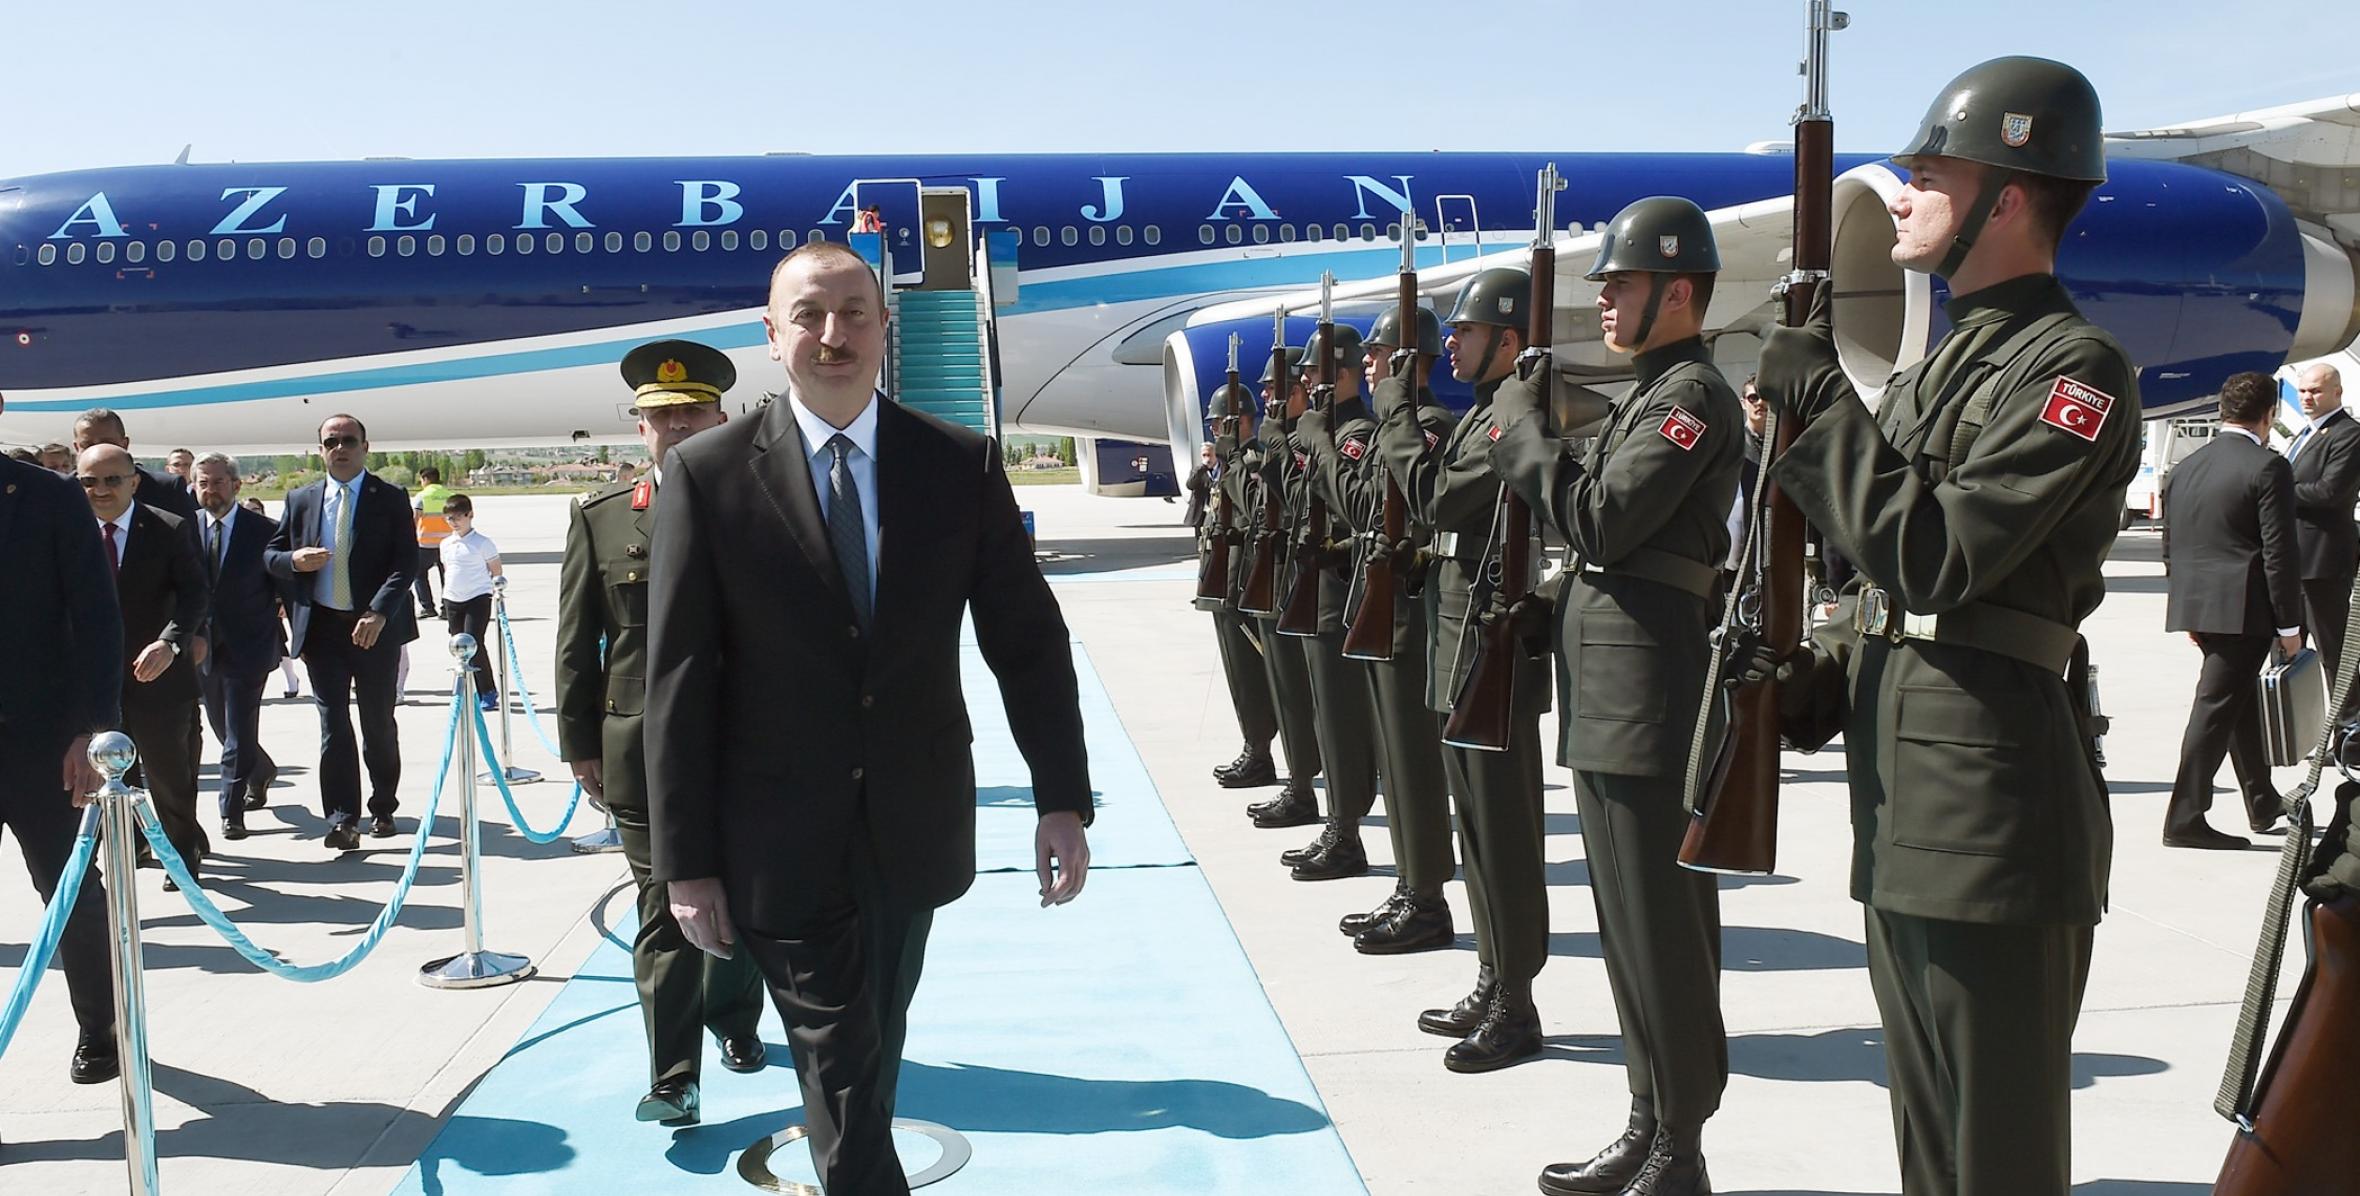 Ilham Aliyev arrived in Turkey on an official visit